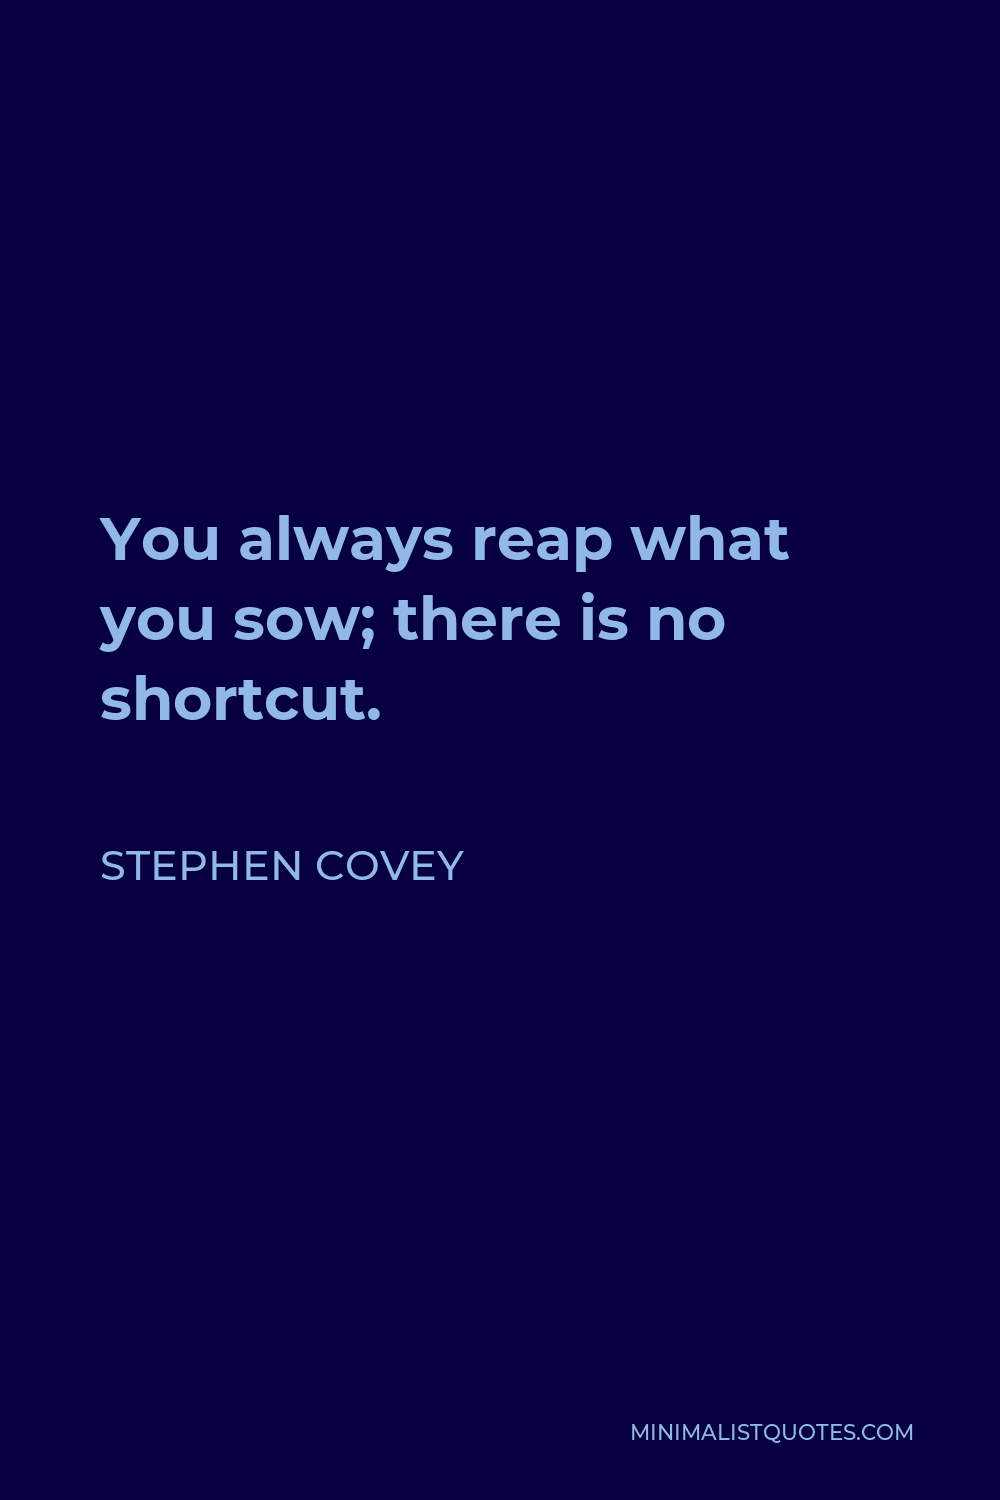 Stephen Covey Quote - You always reap what you sow; there is no shortcut.